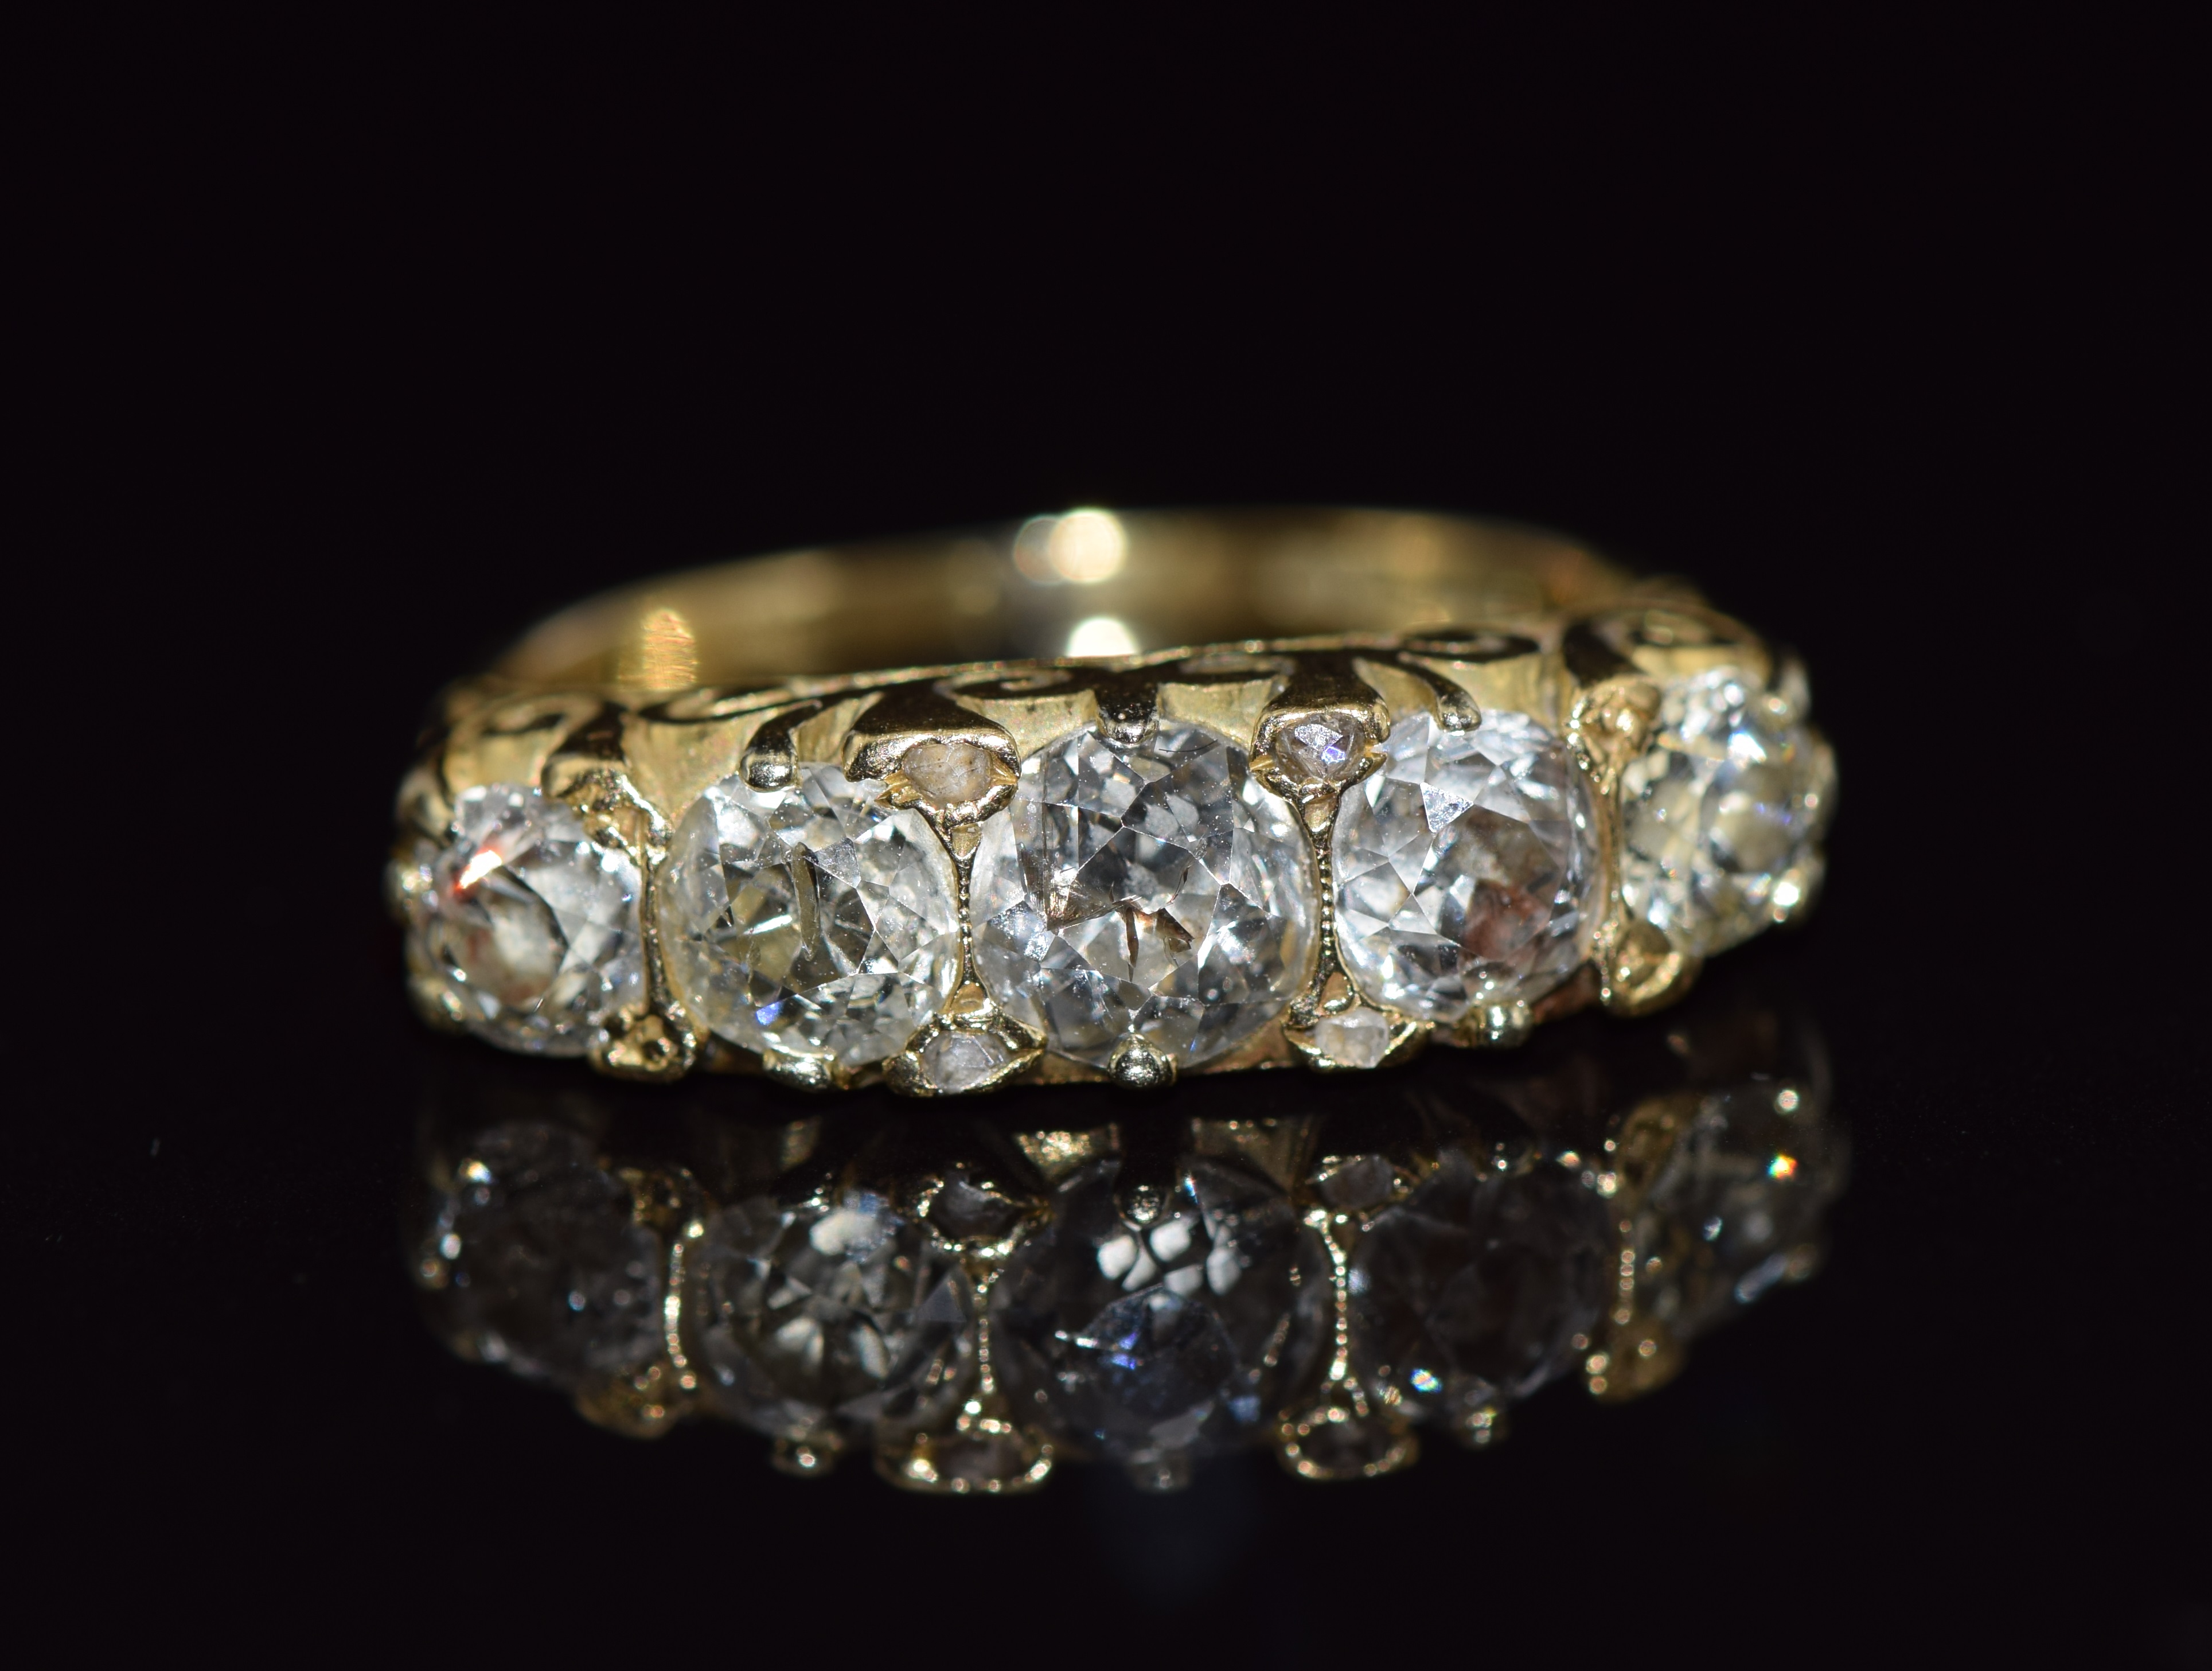 An 18ct gold ring set with five old cut diamonds measuring 0.65, 0.45, 0.45, 0.3ct & 0.3ct